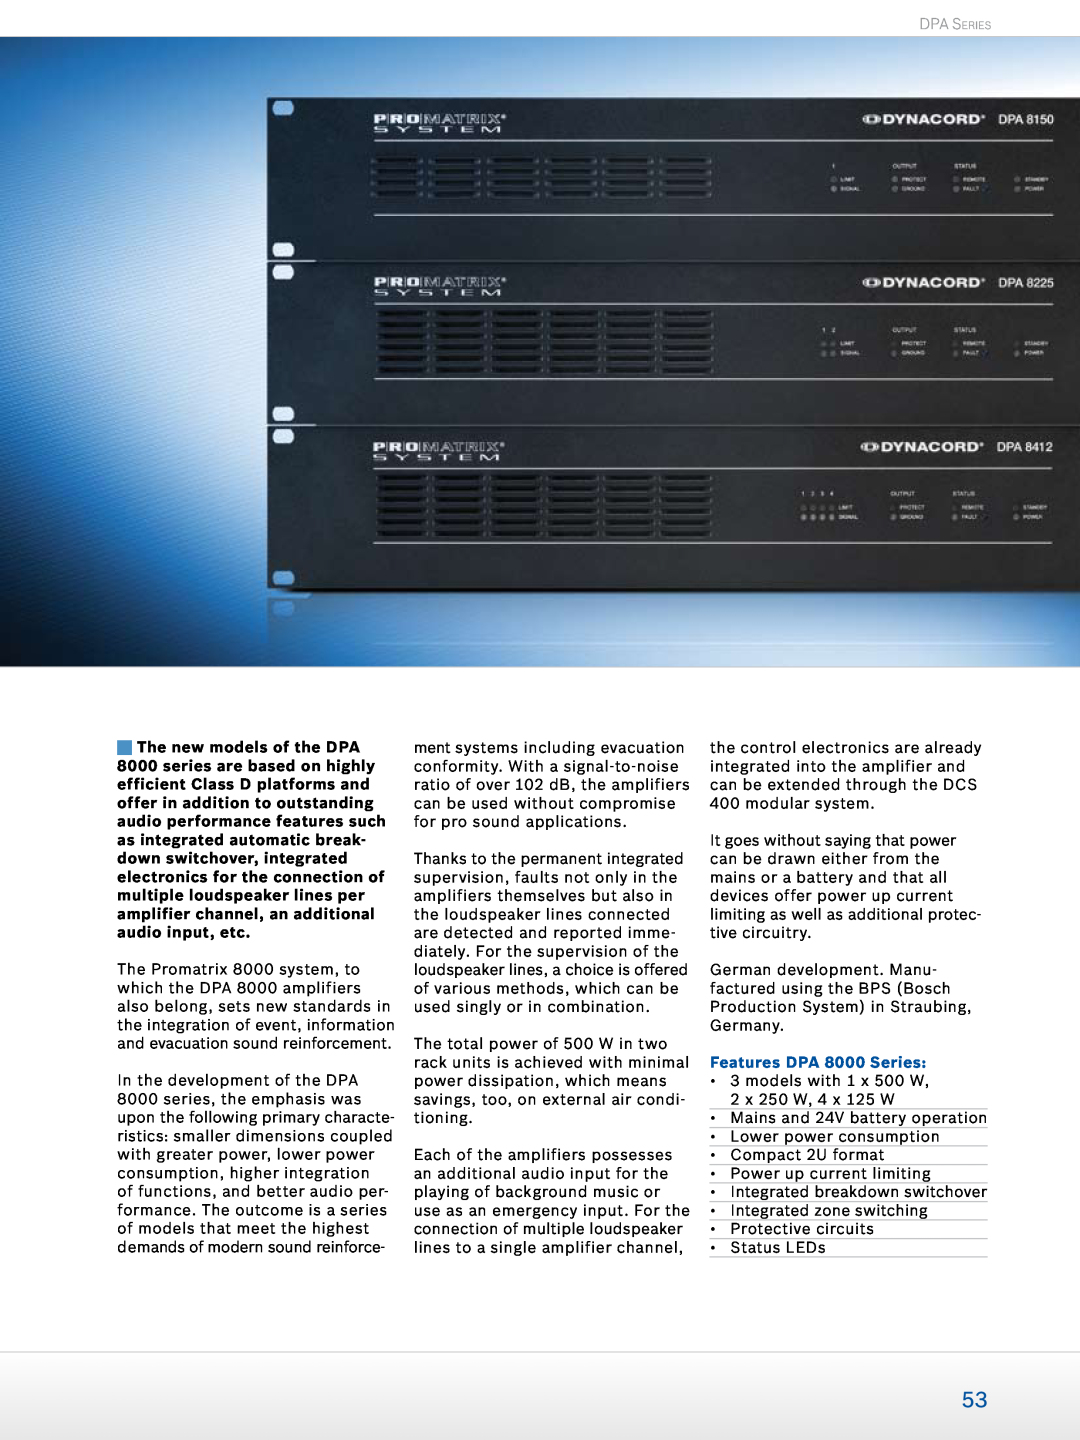 Dynacord Professional Power Amplifiers manual Features DPA 8000 Series, DPA Series 